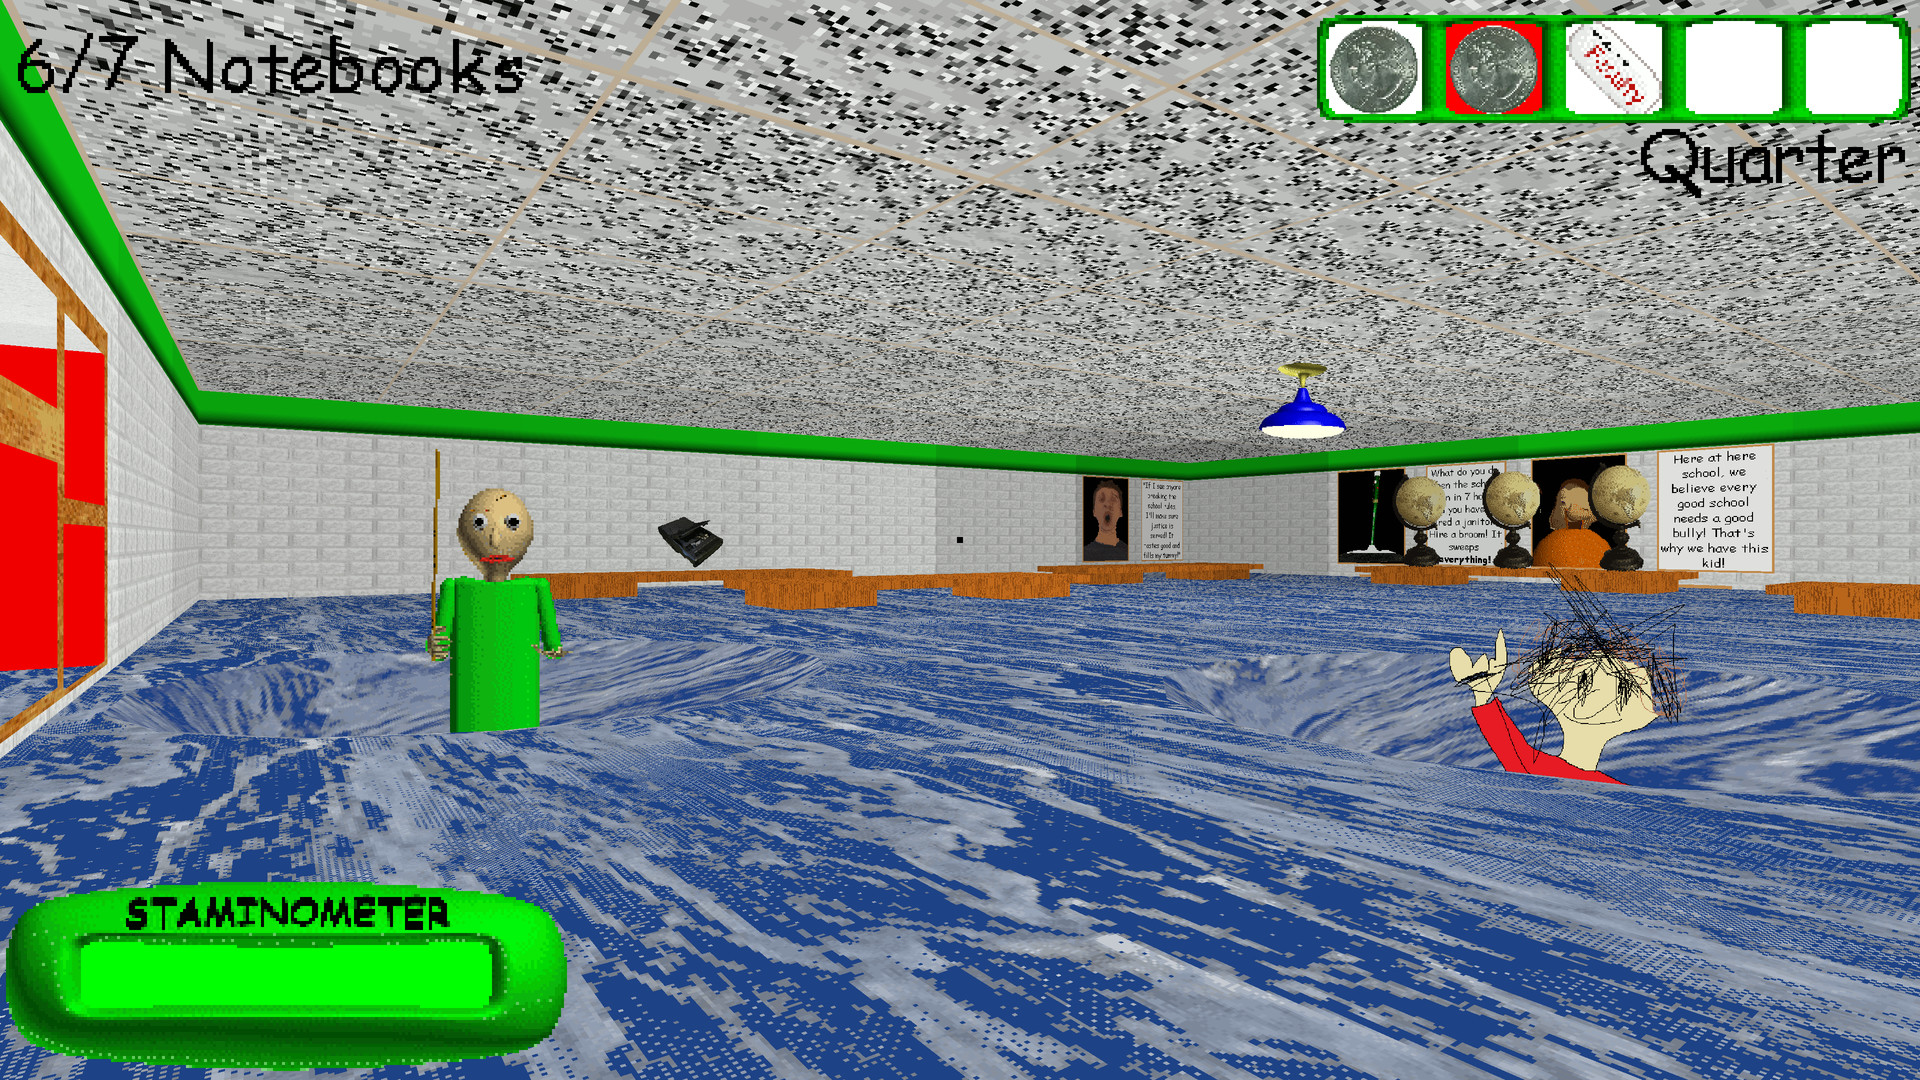 Games like Baldi's Basics in Education and Learning • Games